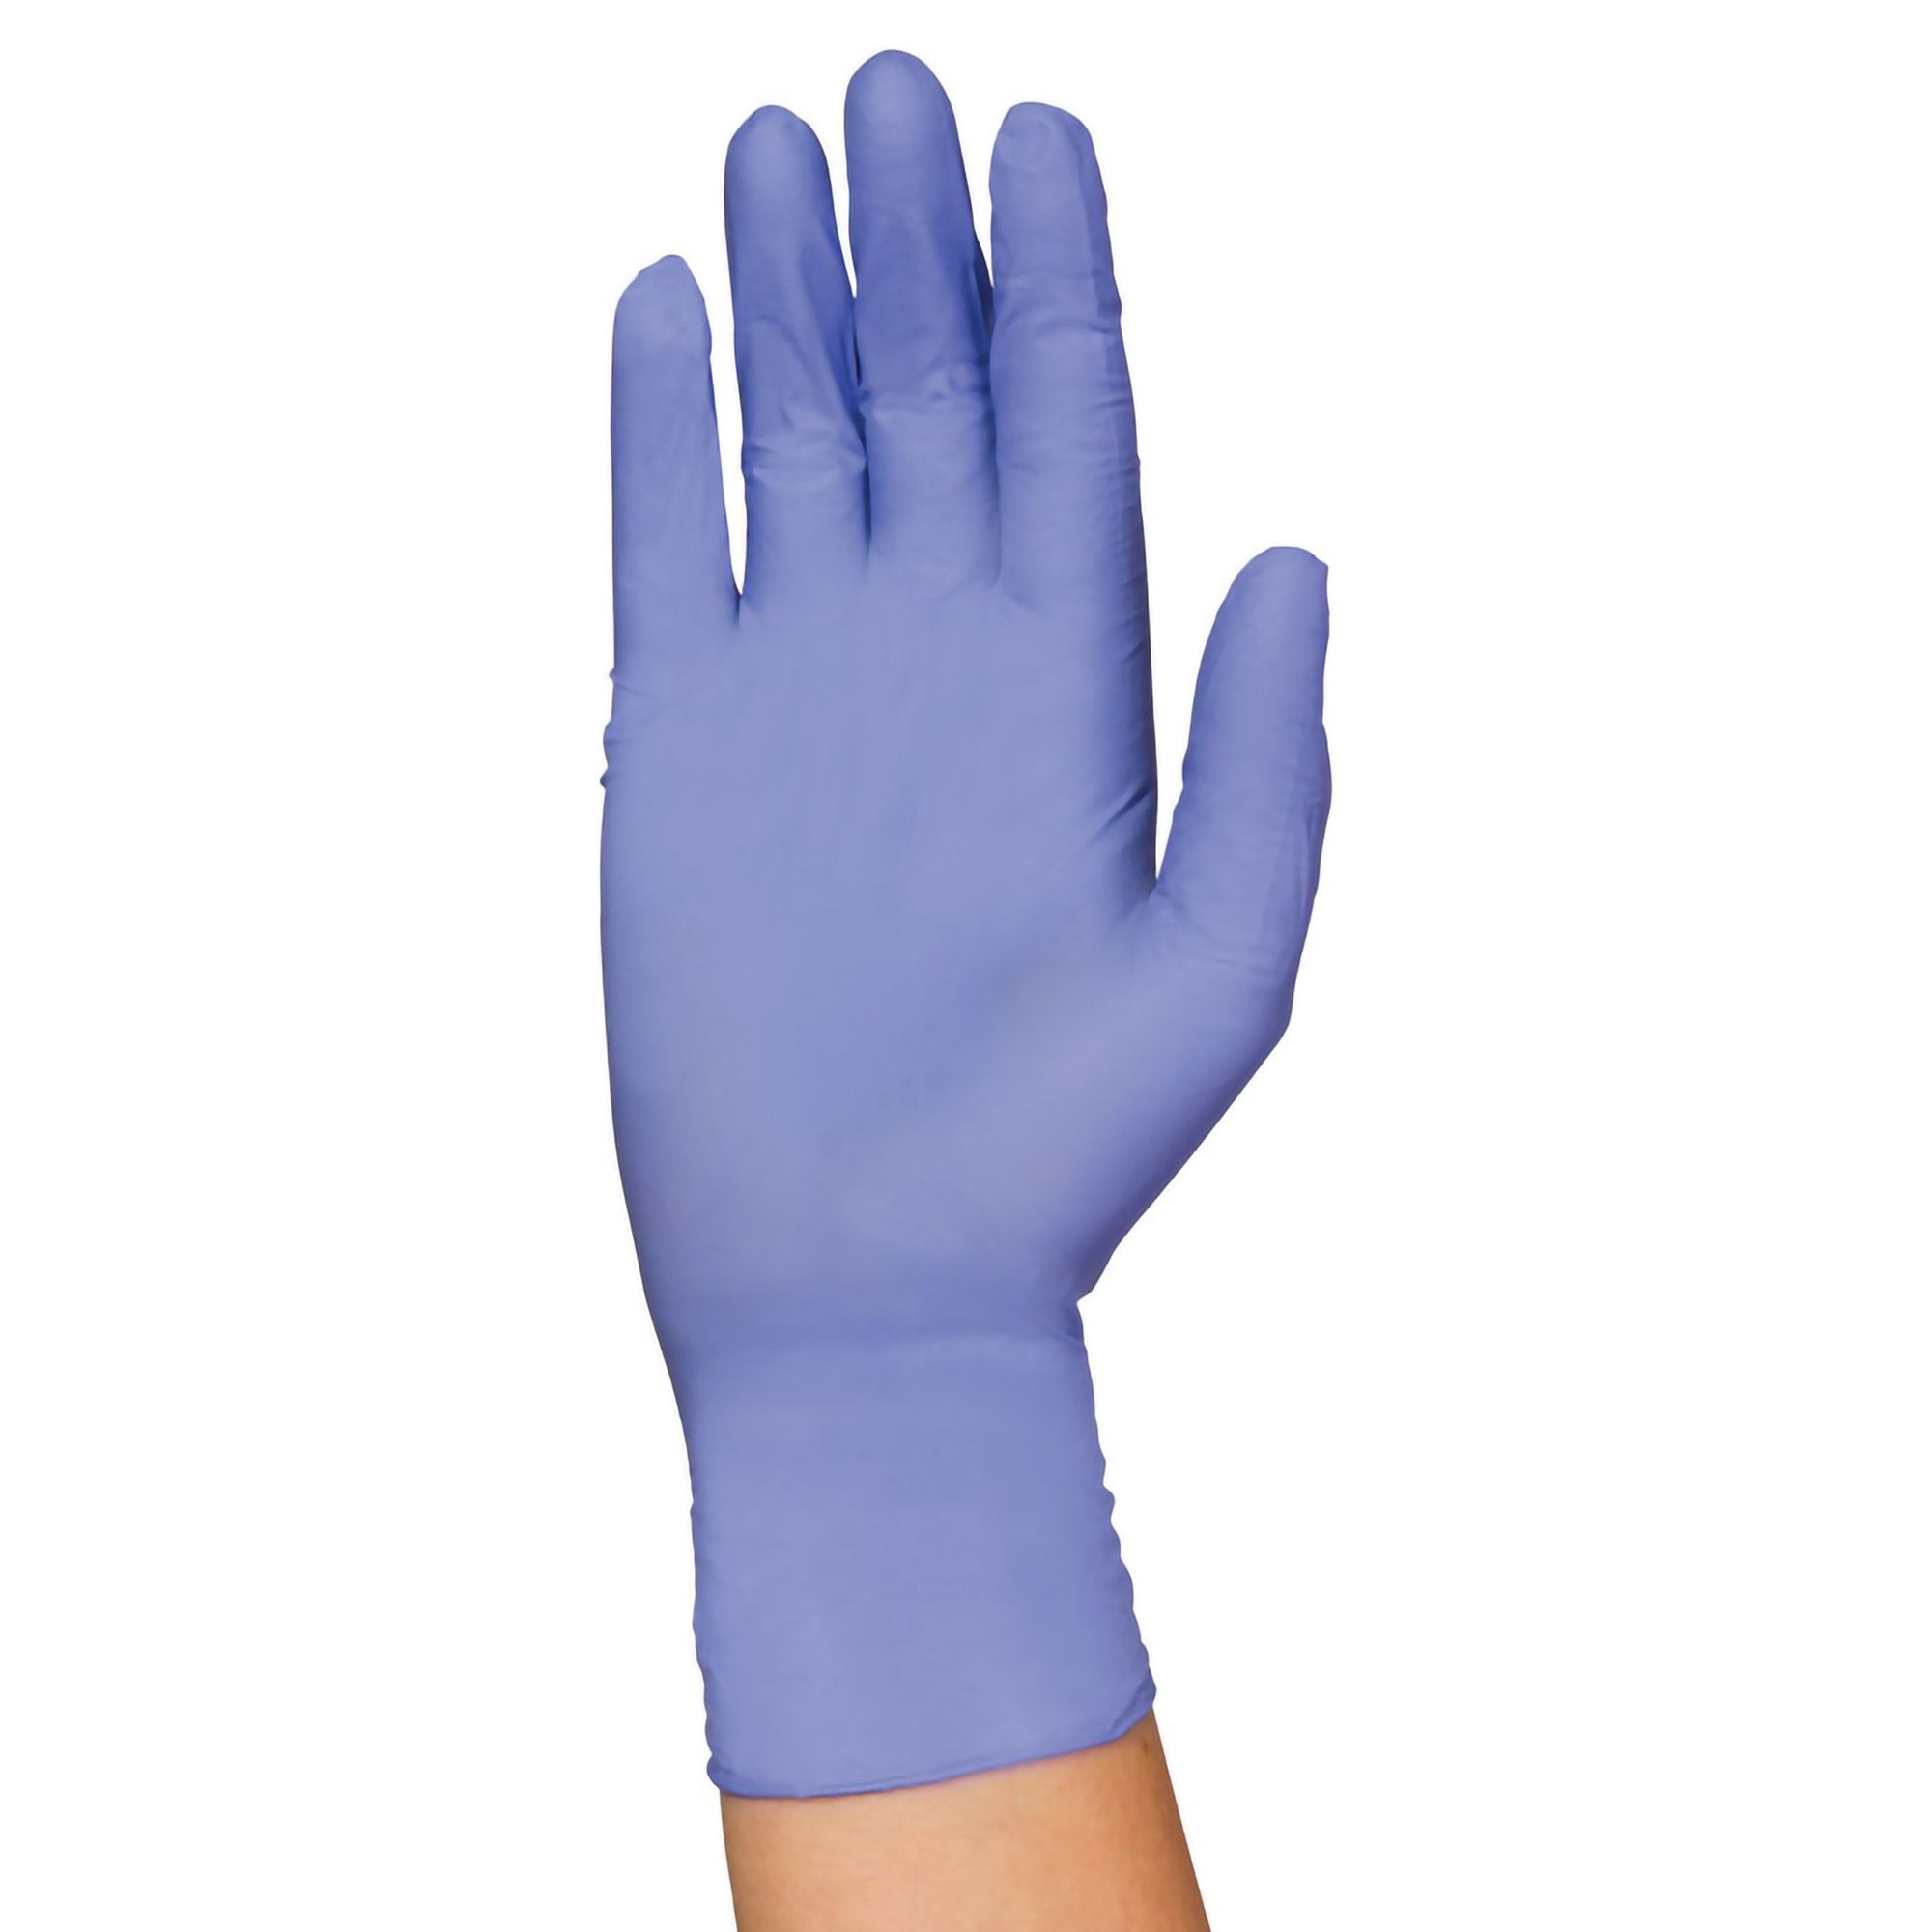 Exam Glove PremierPro™ Plus Large NonSterile Nitrile Standard Cuff Length Textured Fingertips Blue Chemo Tested